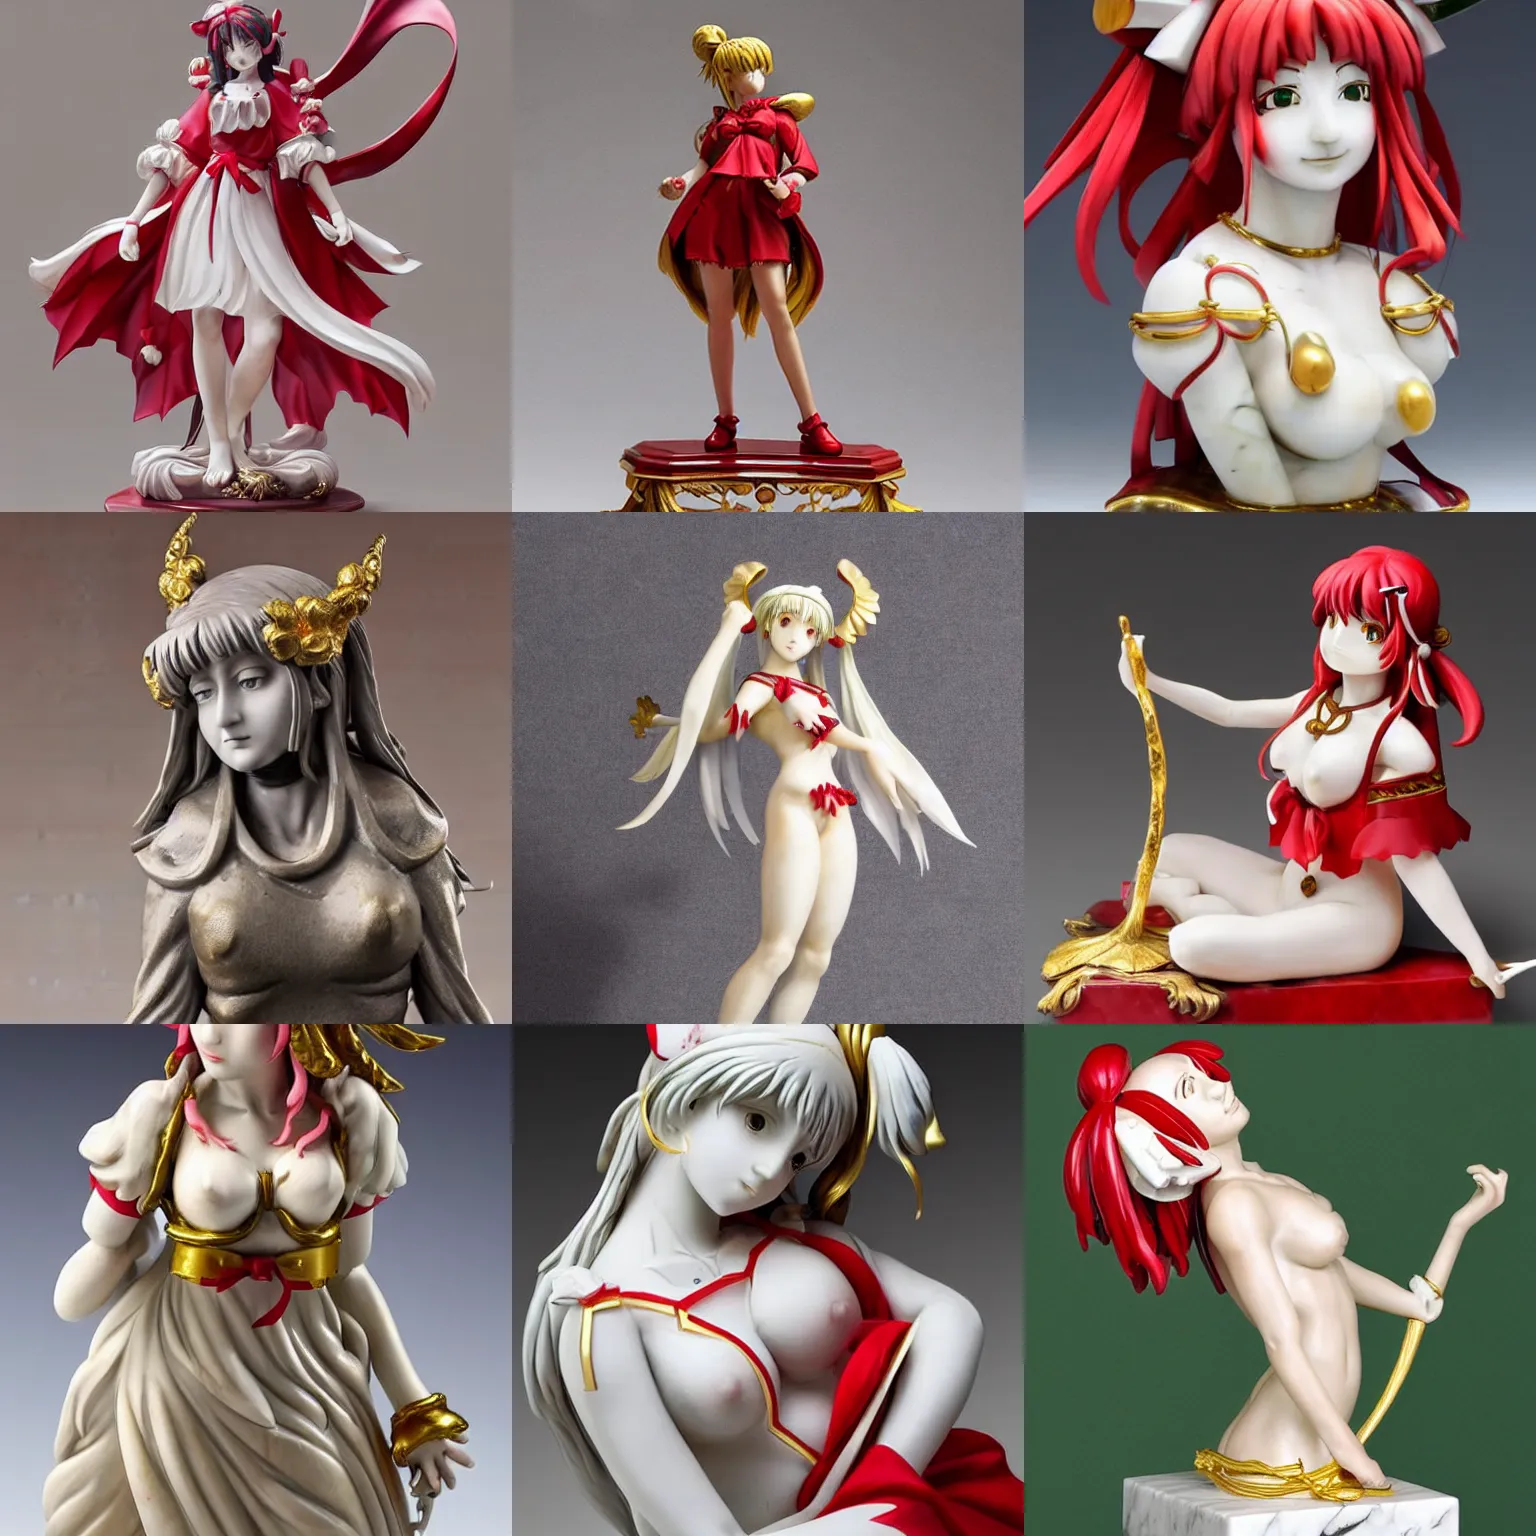 Prompt: a sculpture of reimu hakurei, marble, gold, masterpiece, anatomically correct, looks like a real girl